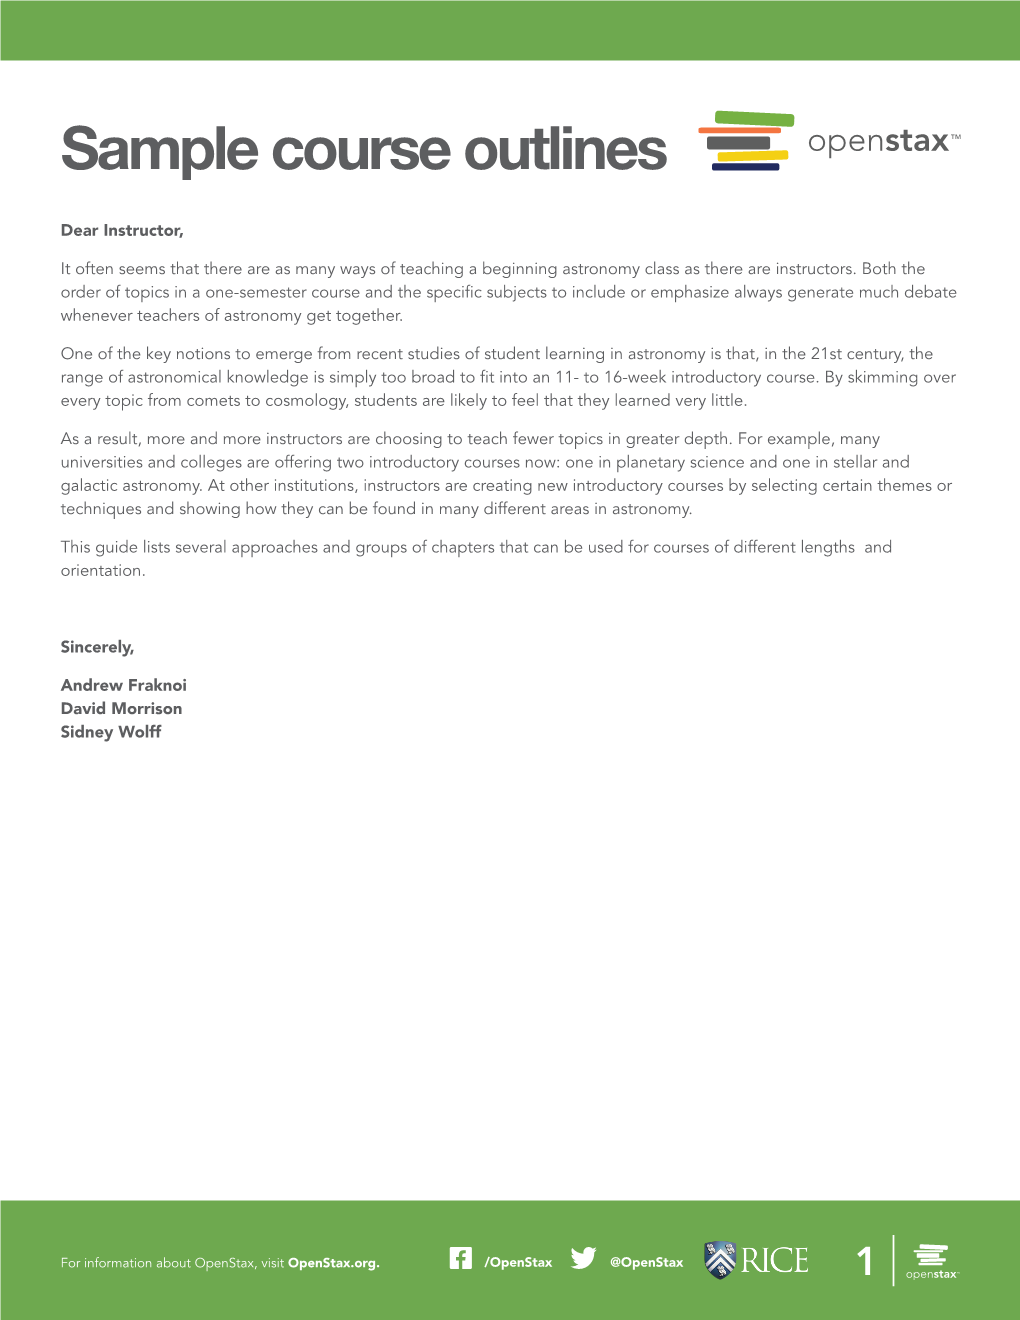 Sample Course Outlines